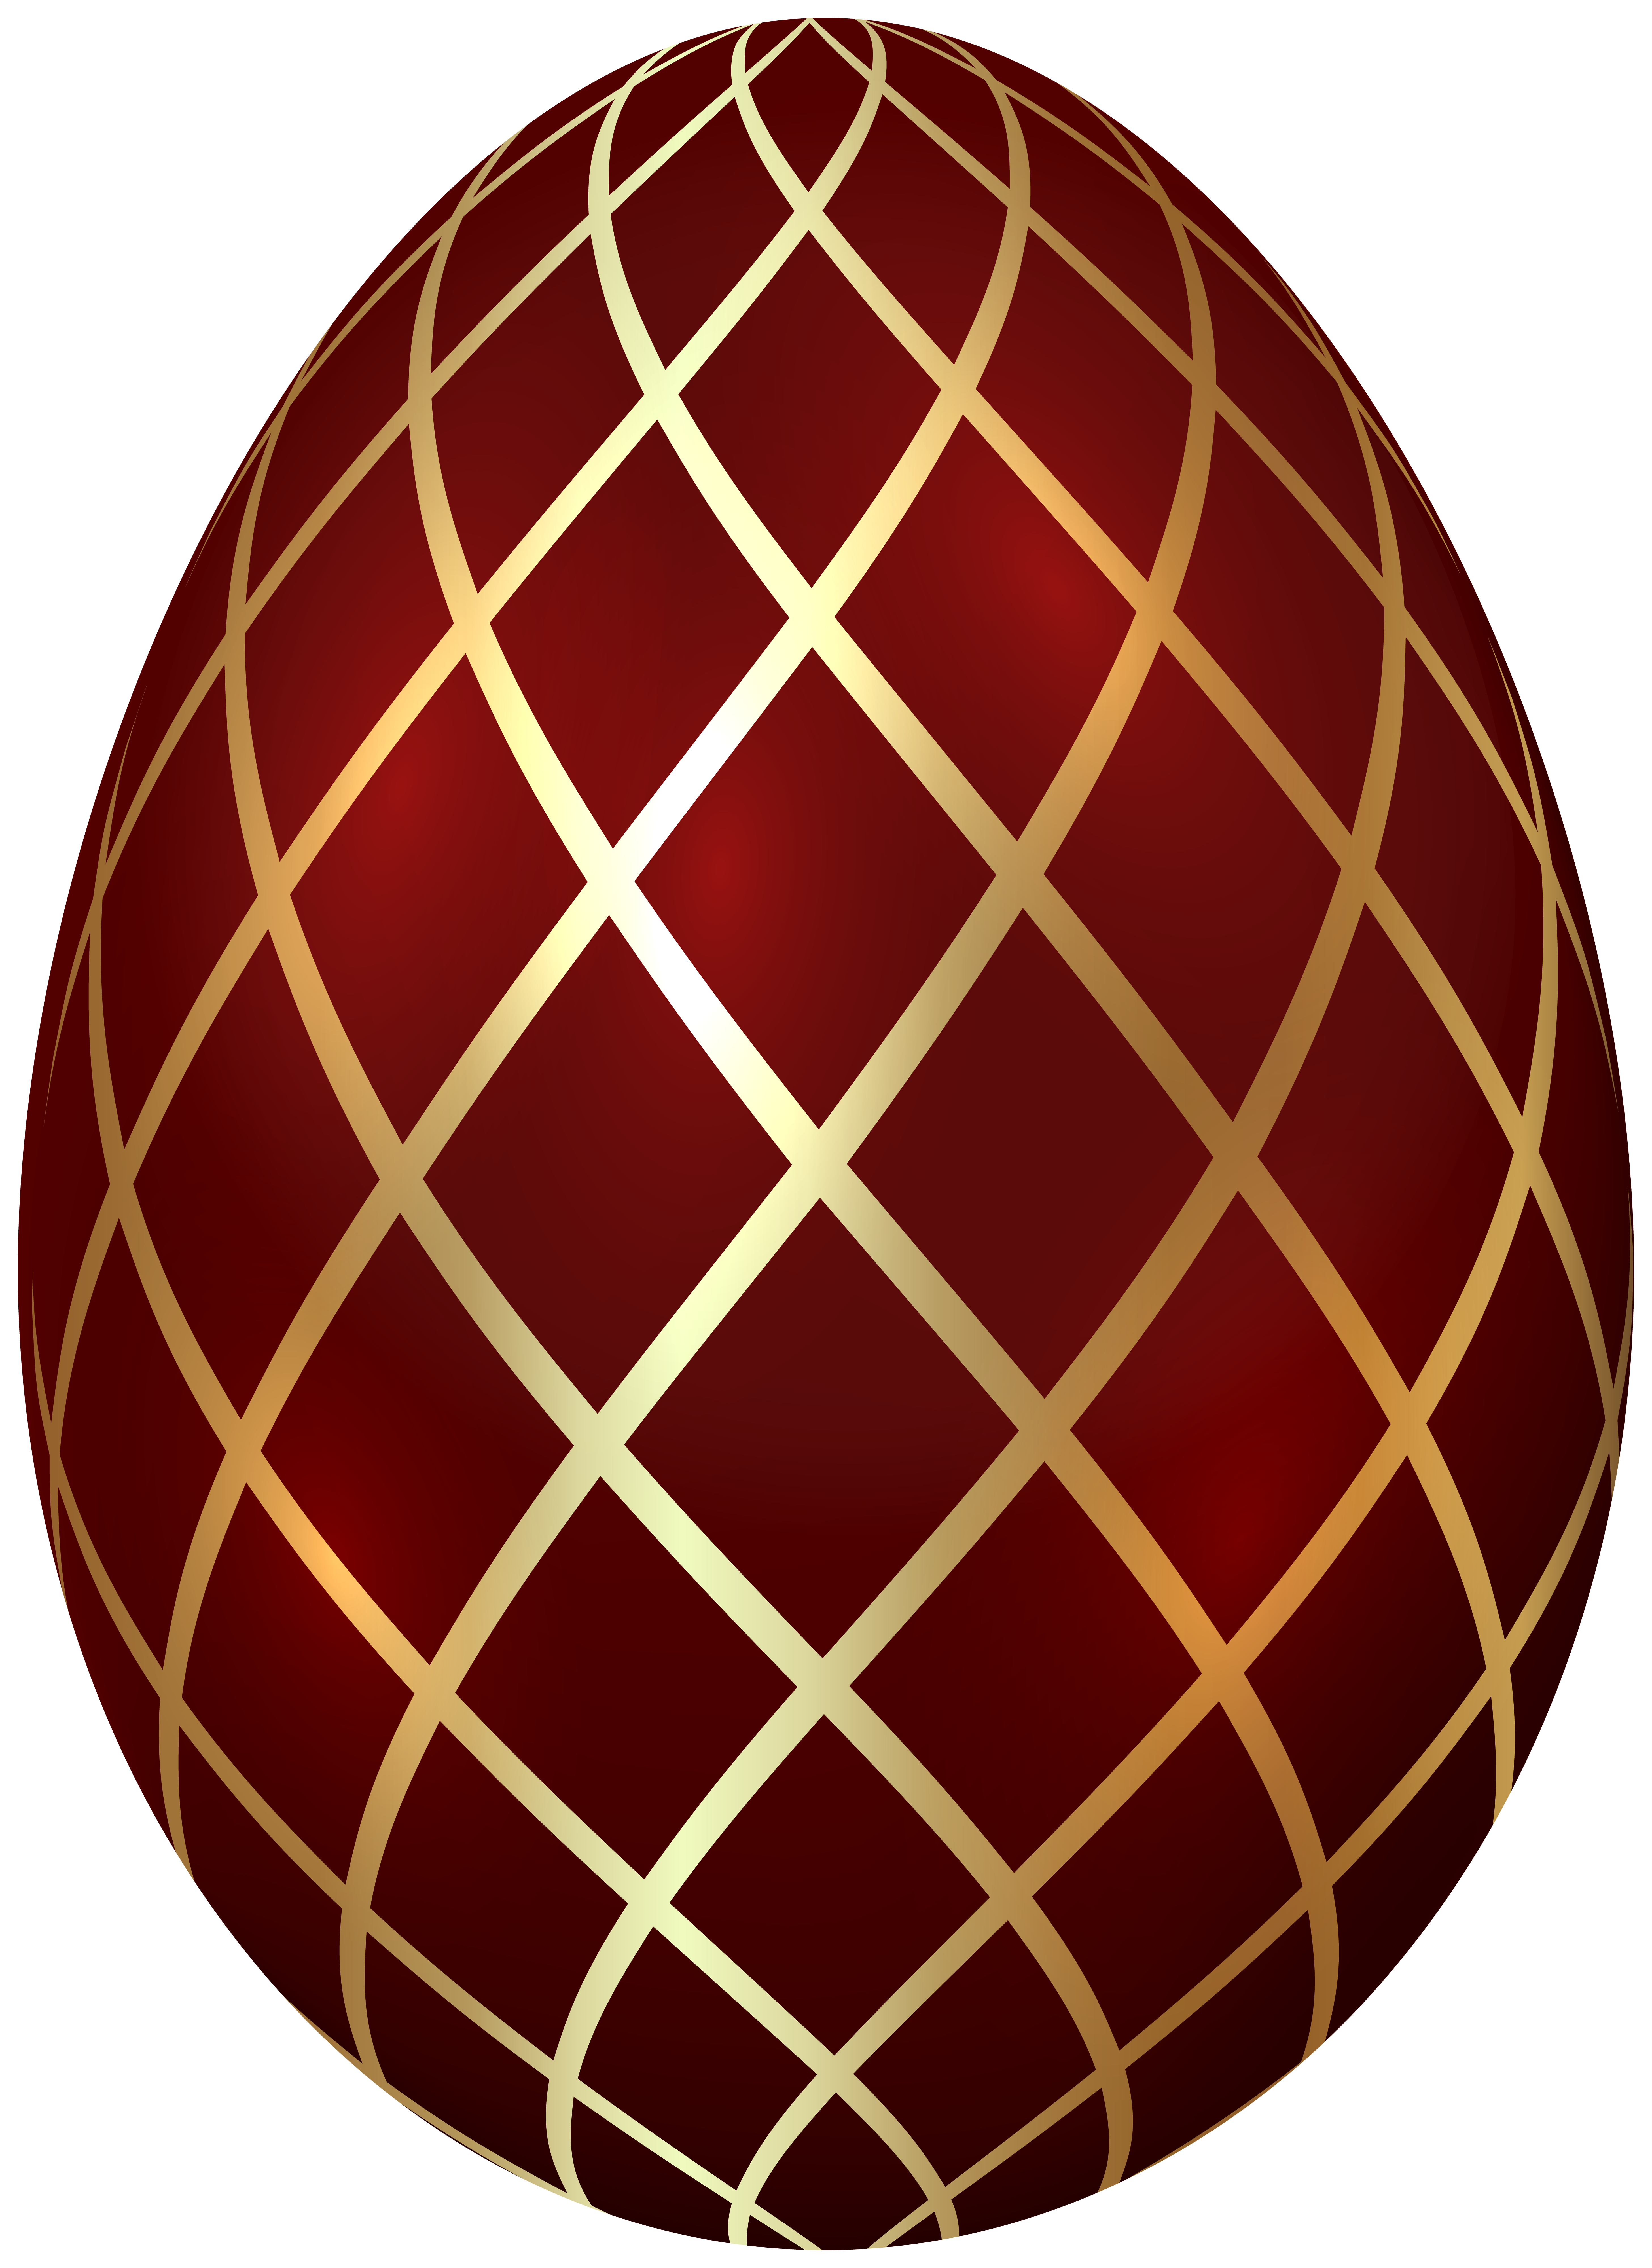 Easter Eggs Clipart, PNG - Transparent Background (2474779)